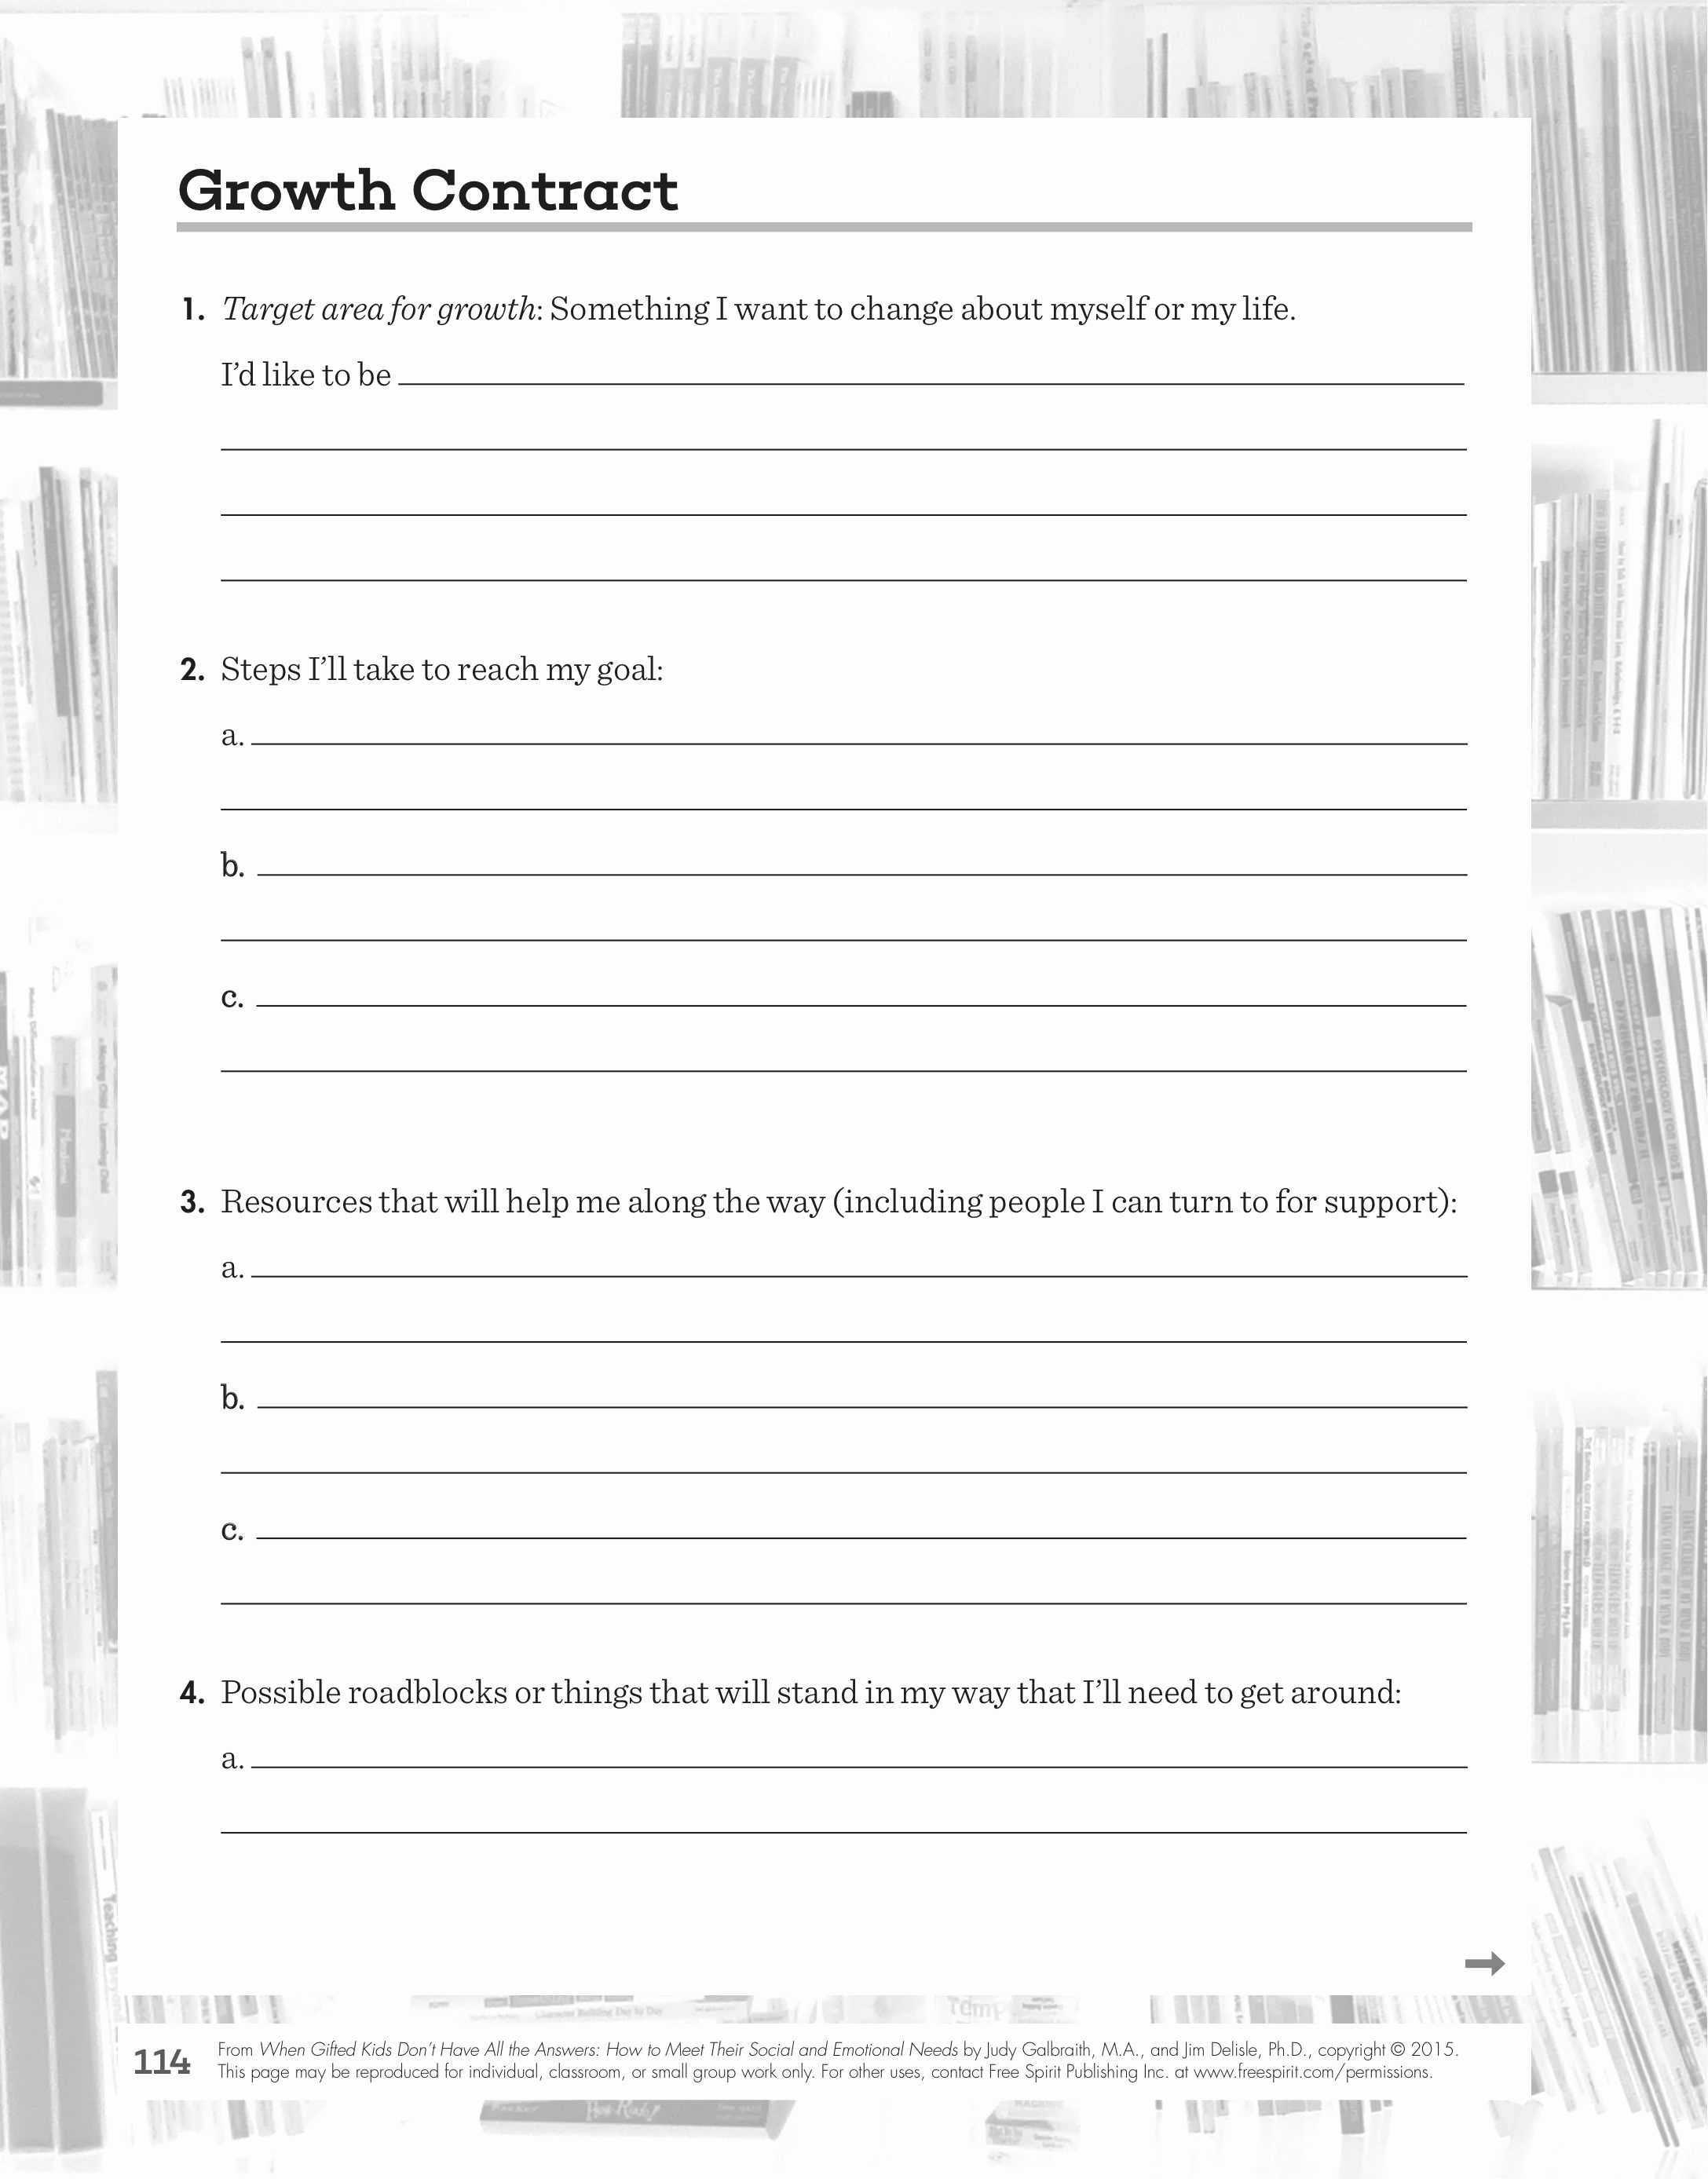 Constitutional Principles Worksheet Answers together with 32 Constitutional Principles Worksheet Answers Document Design